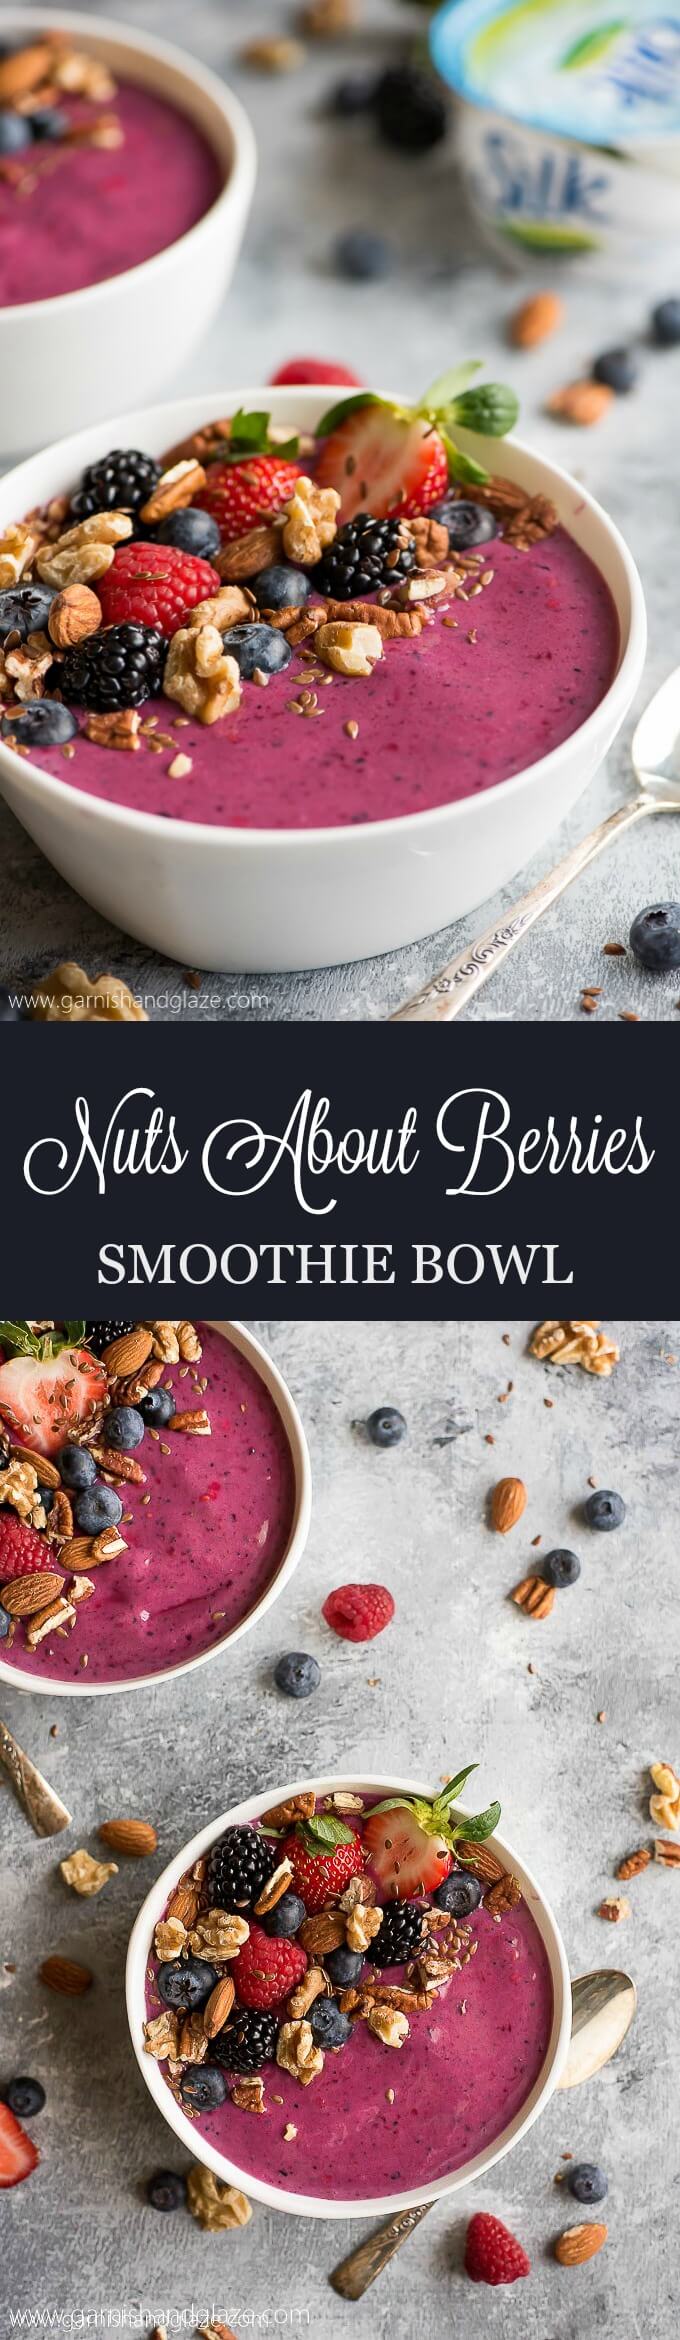 Start your days out right with a refreshing Nuts About Berries Smoothie Bowl that takes all of 2 minutes to throw together. #WellnessYourWay #ad @bakersgrocery @LoveMySilk